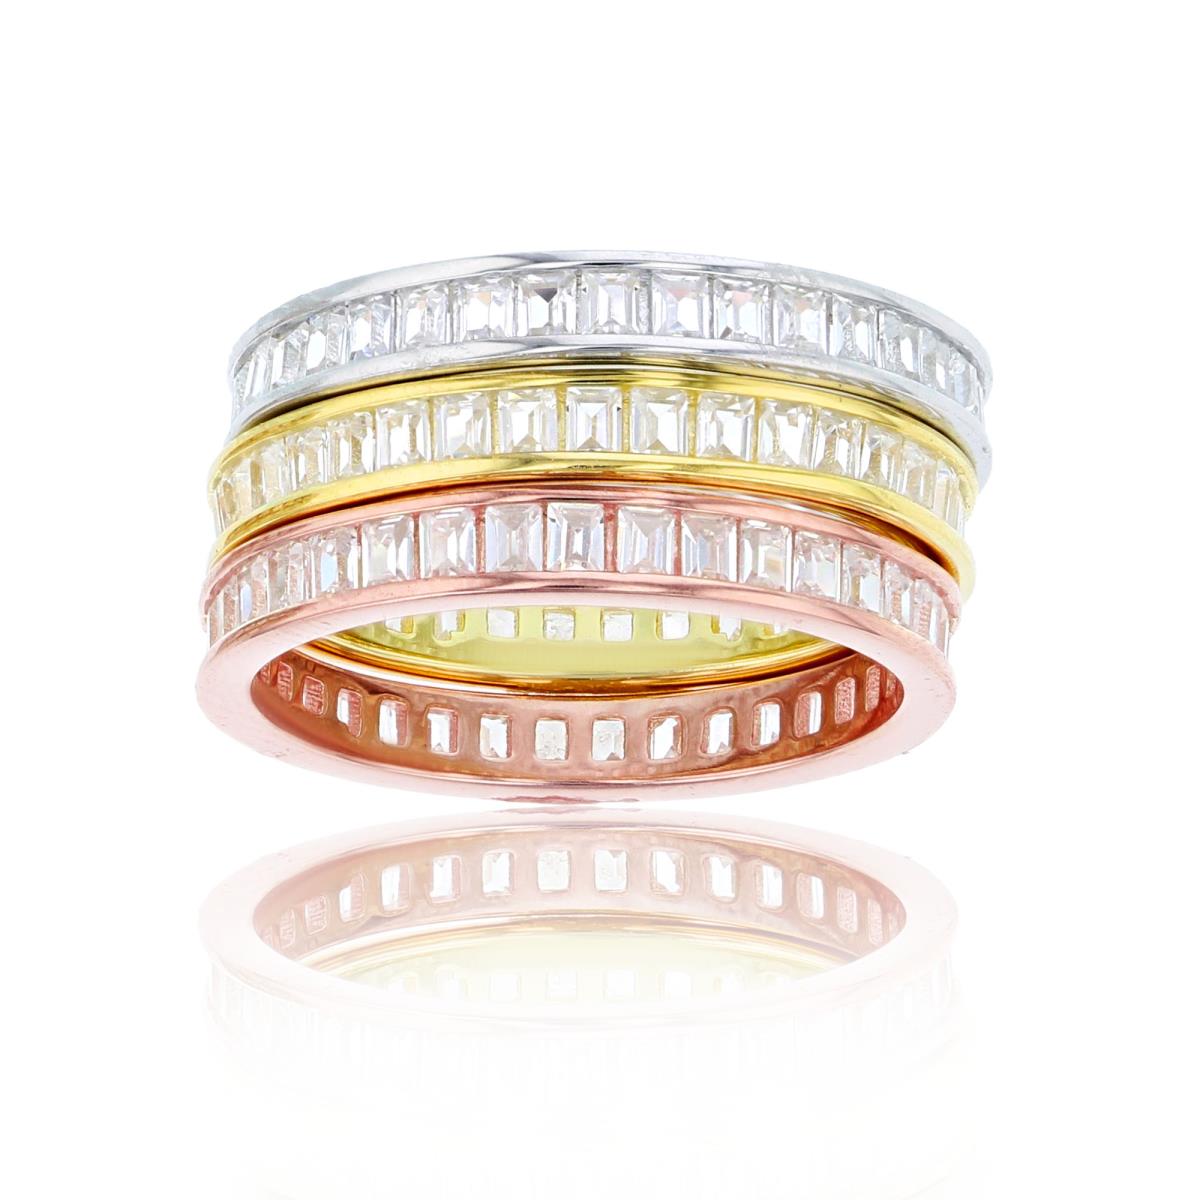 Sterling Silver Tricolor 1-MicronBaguette Channel Set Stack Ring